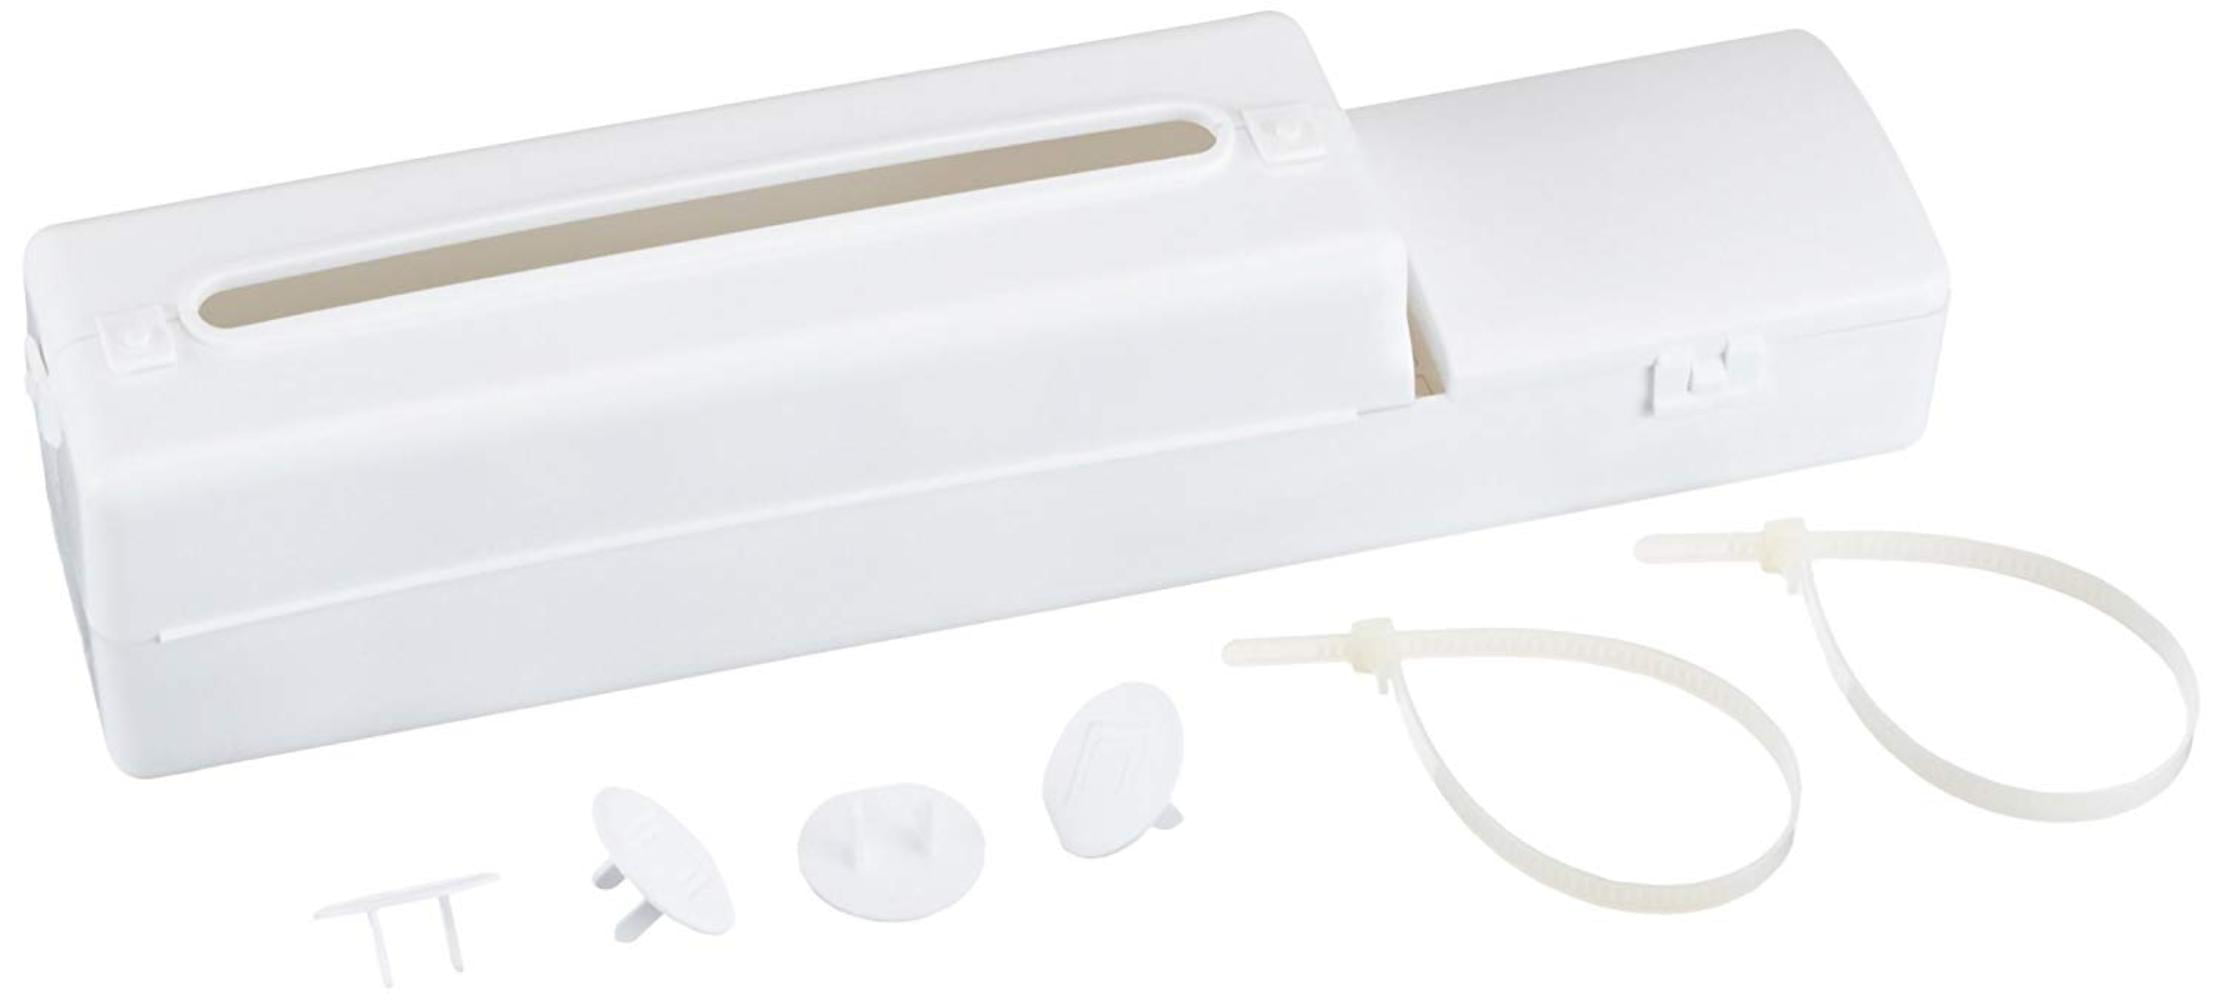 Mommys Helper Power Strip Safety Cover 1-Pack White